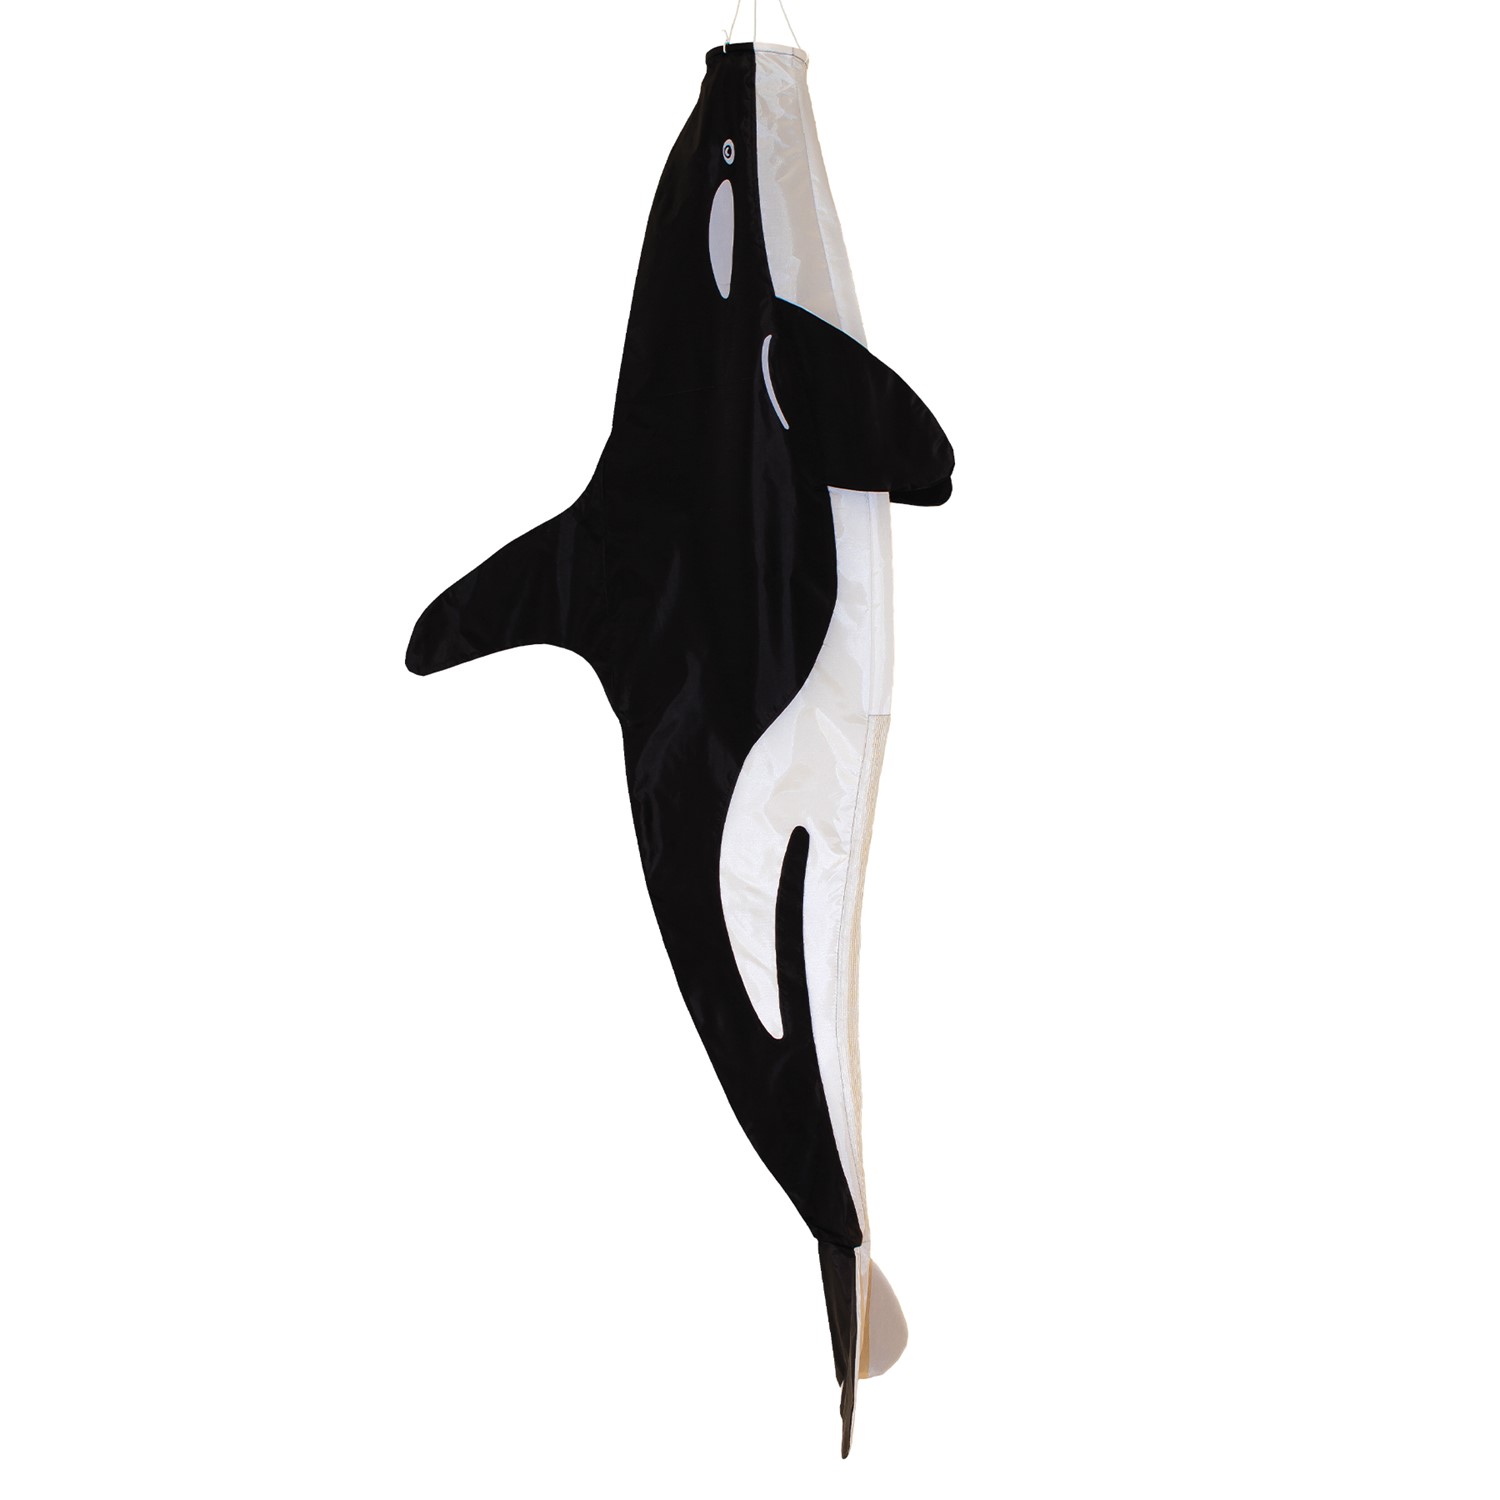 In the Breeze 54" Orca Windsock 4954